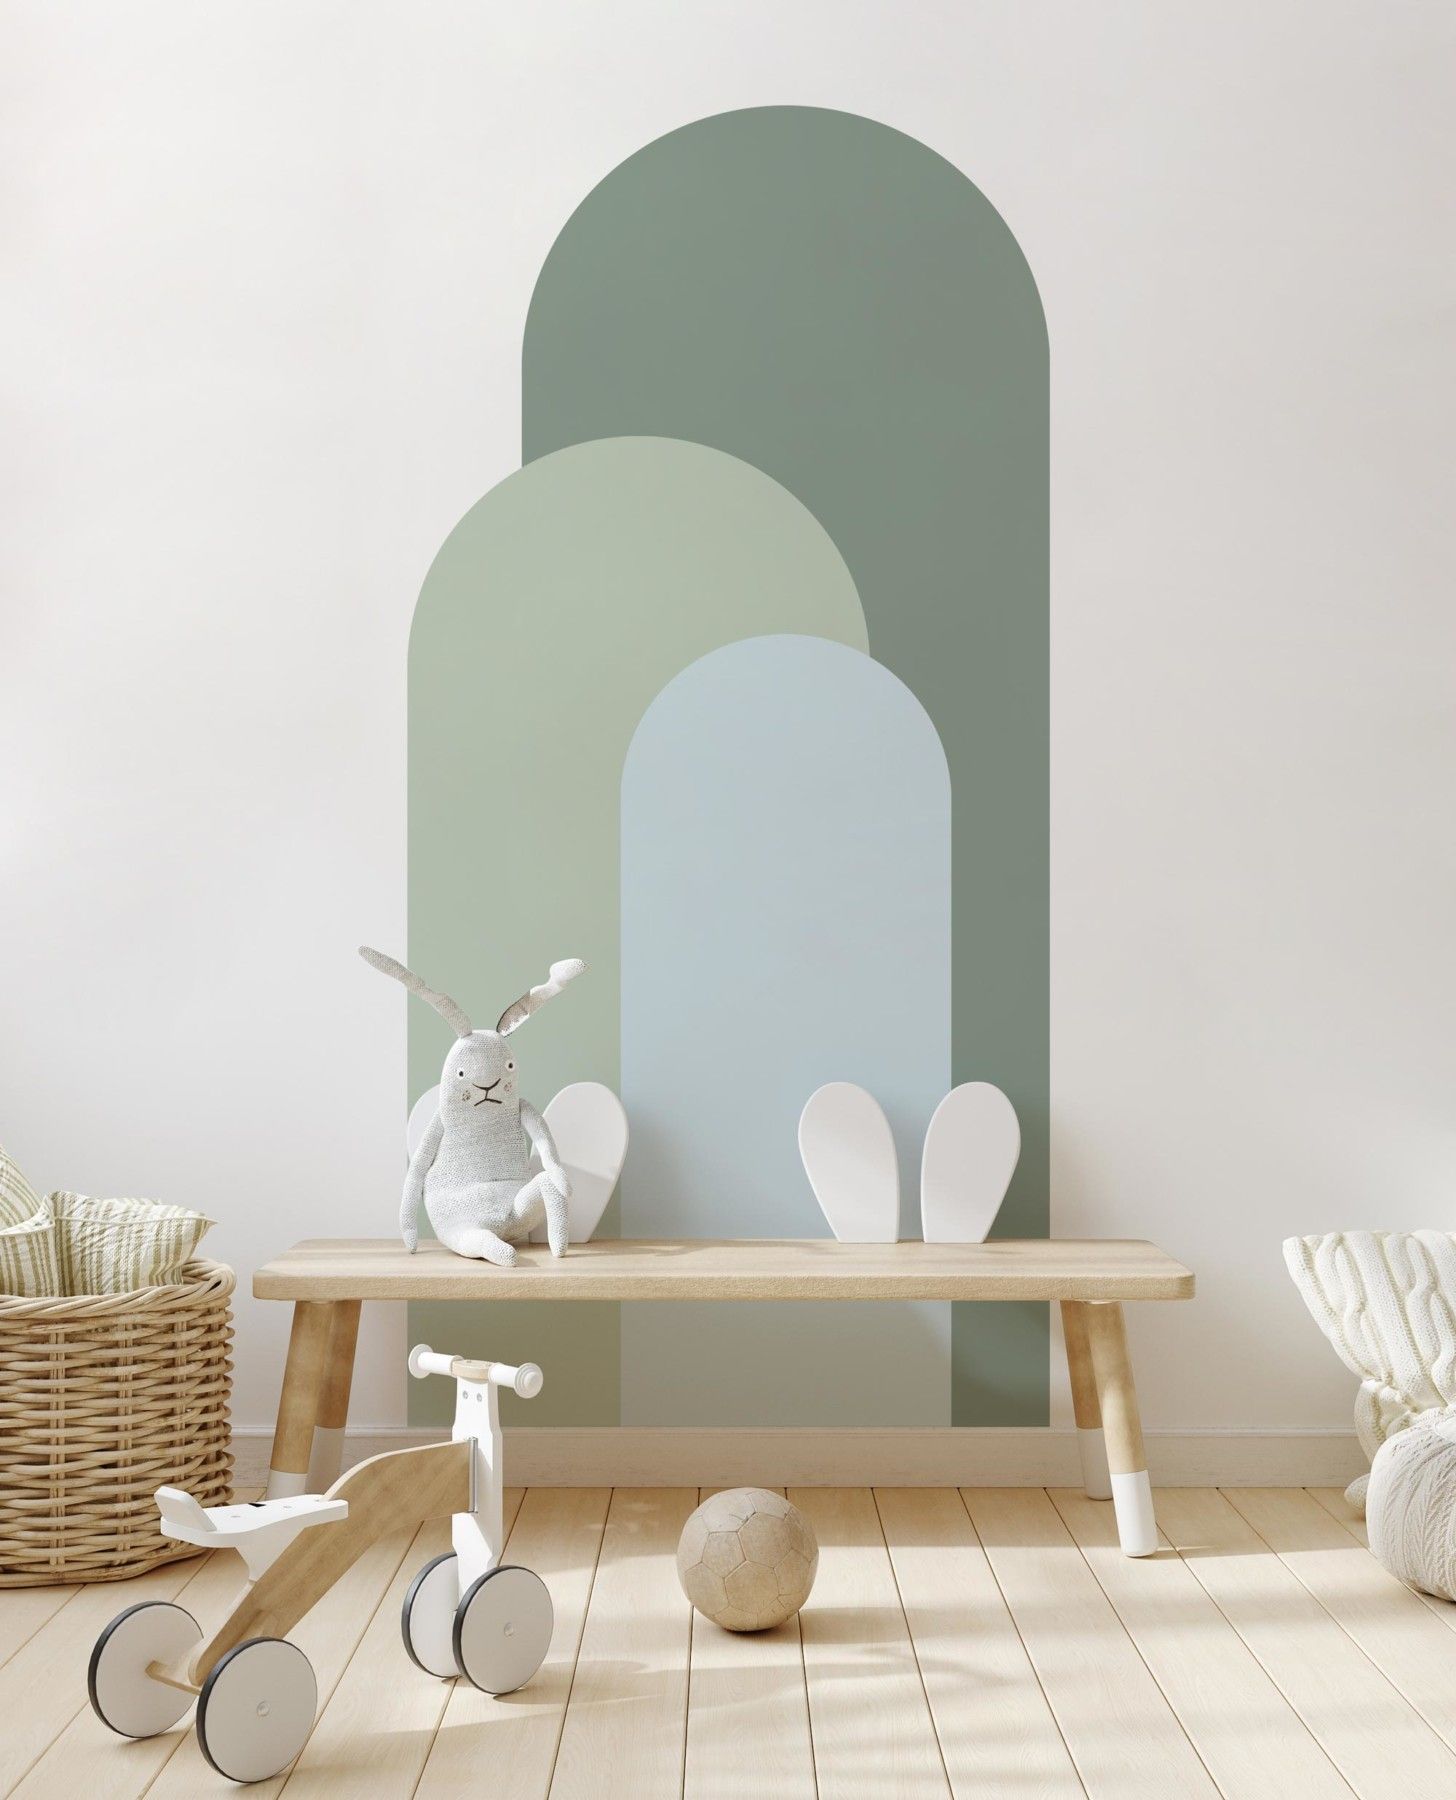 Affordably decoration with custom wall
decals